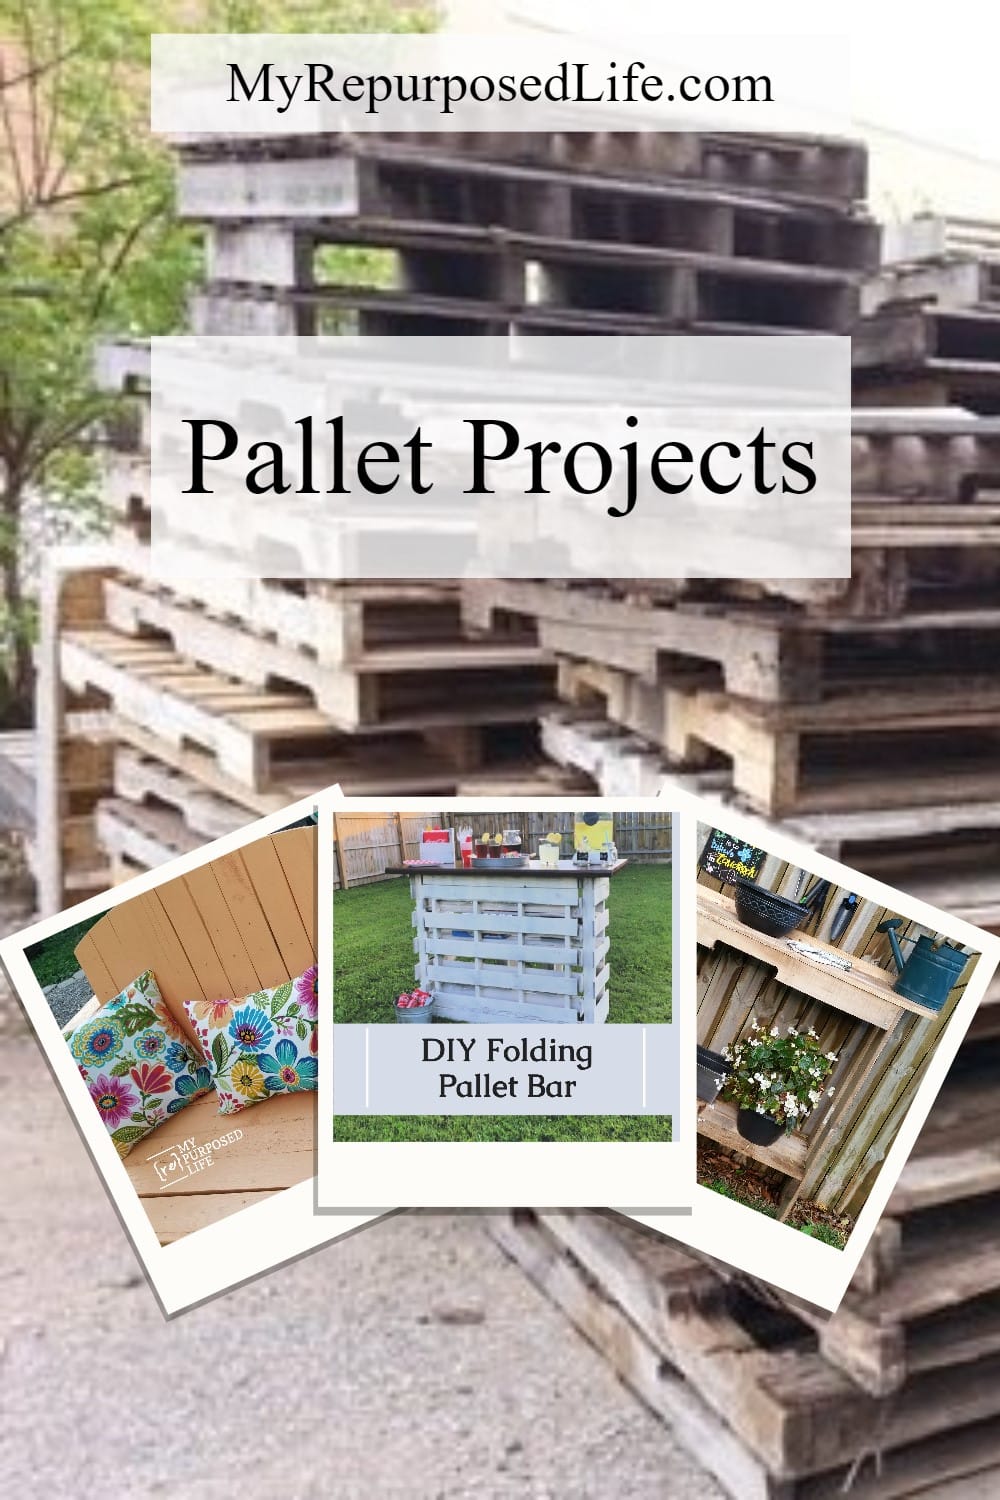 Do you LOVE pallet projects? I have tips for easily dismantling pallets, and a great variety of pallet projects to inspire you. Pallet projects are popular these days because pallets are readily available, and withstand the test of time. #MyRepurposedLife #pallets via @repurposedlife